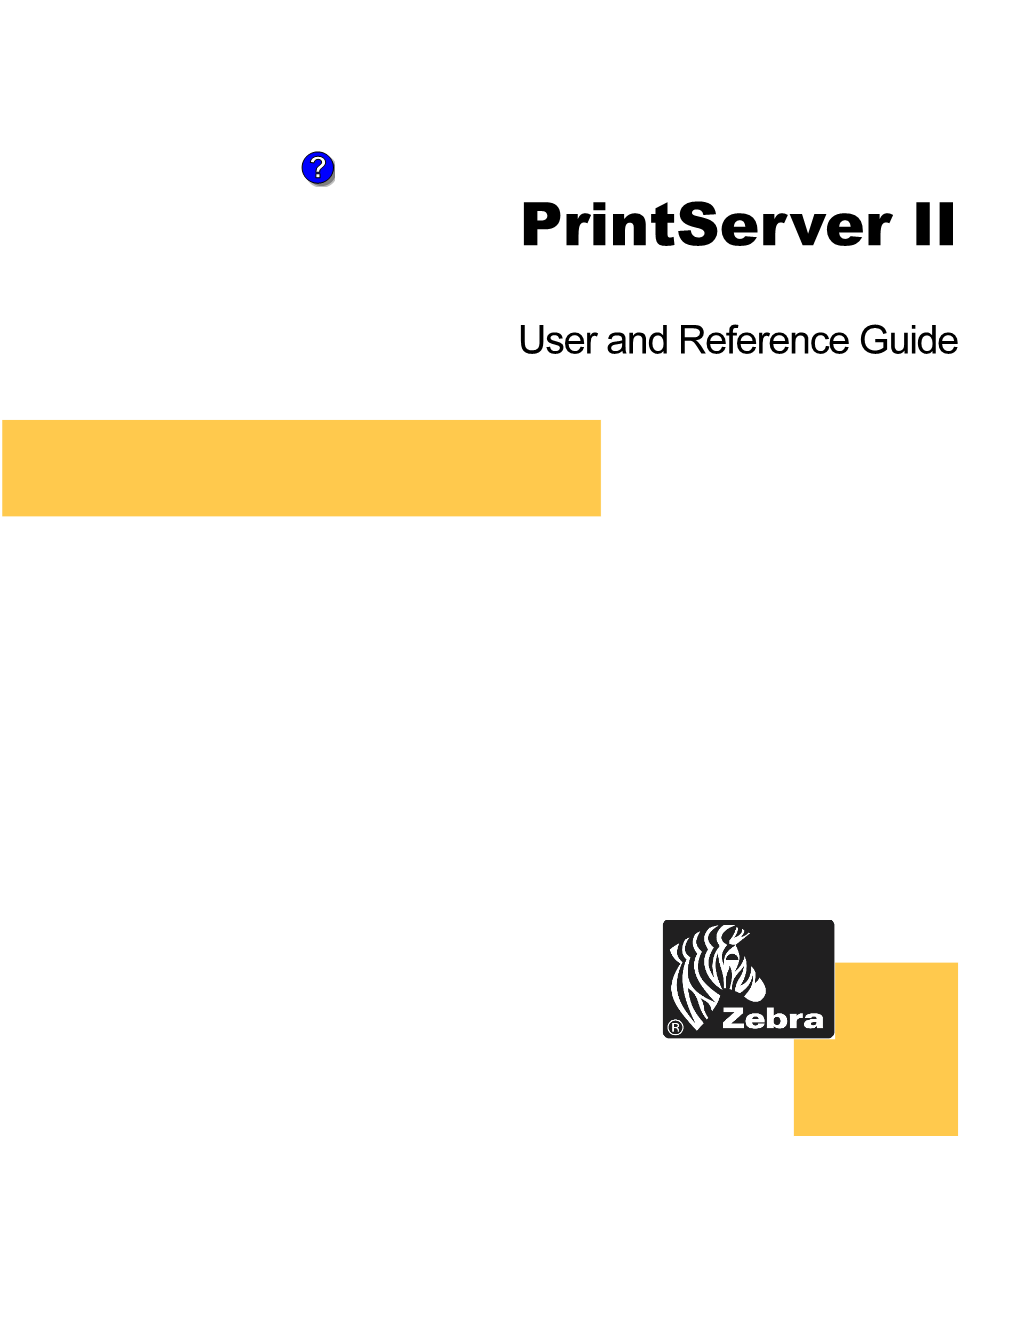 Printserver II User and Reference Guide Consists of These Chapters